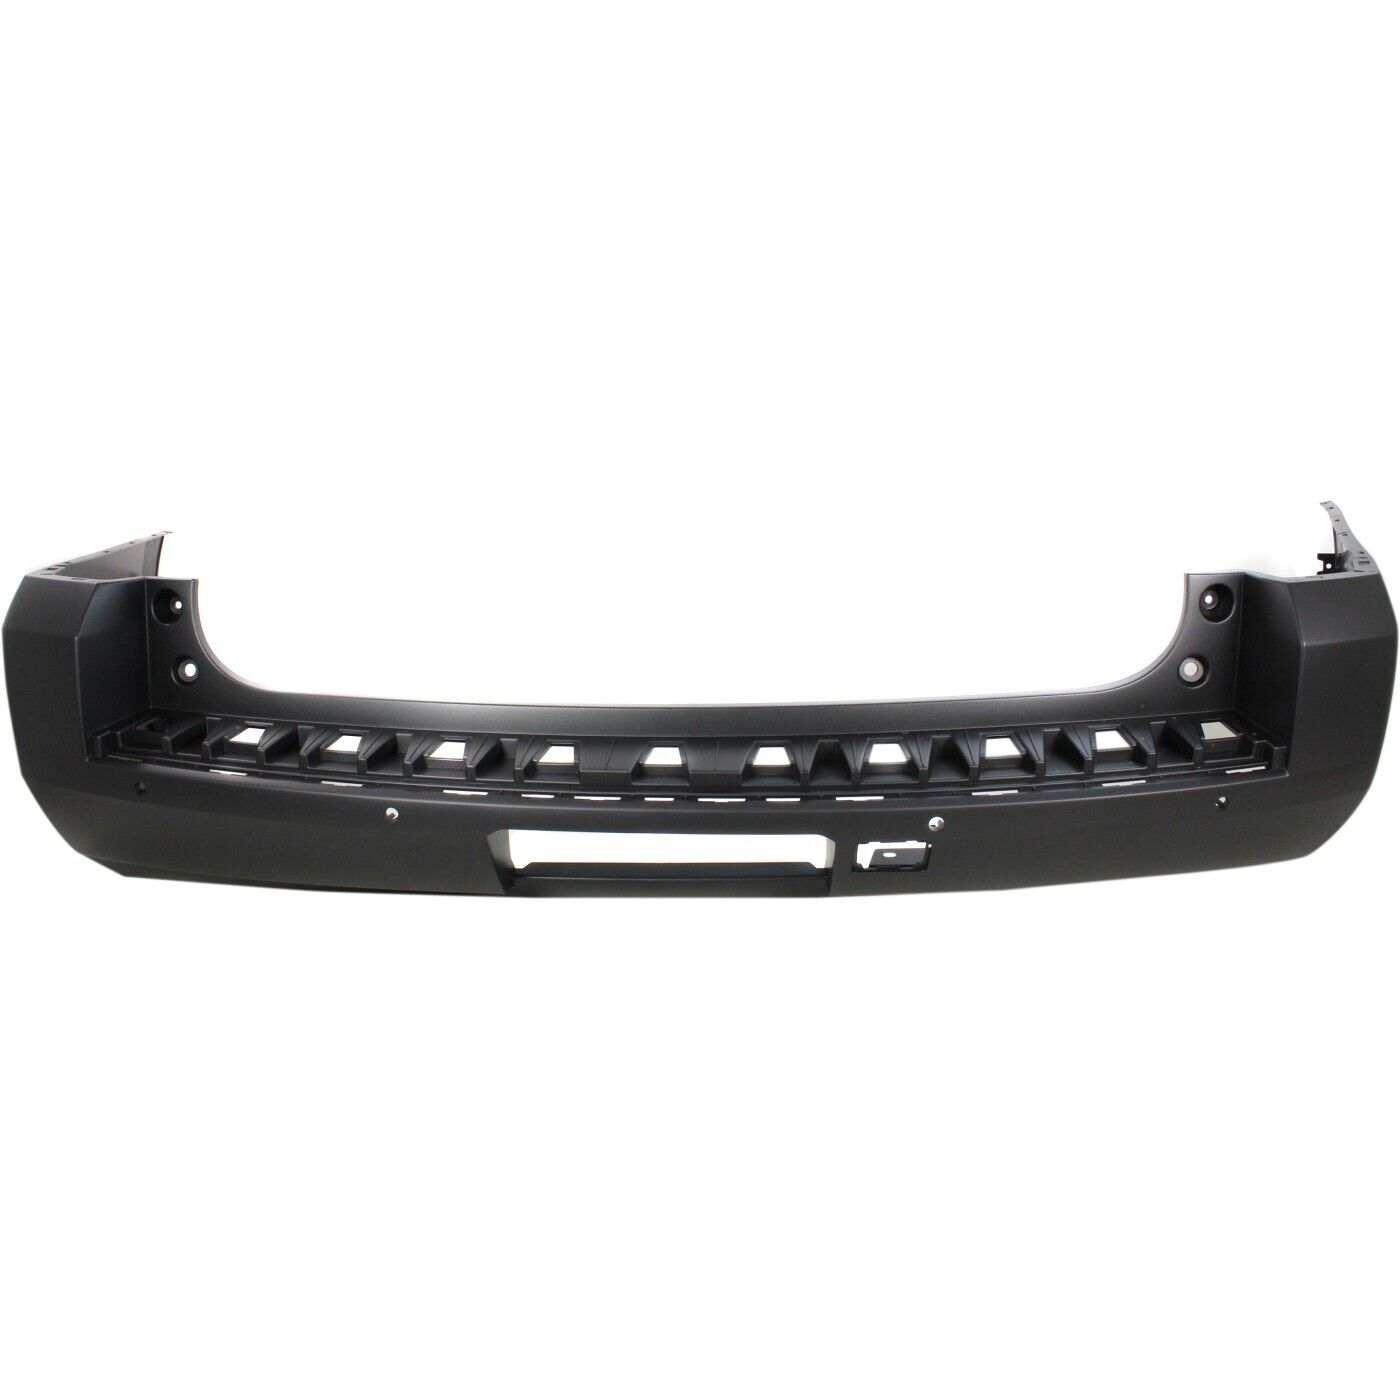 New Bumper Cover Fascia Rear for Chevy Chevrolet Tahoe 15-17 GM1100942 23324503